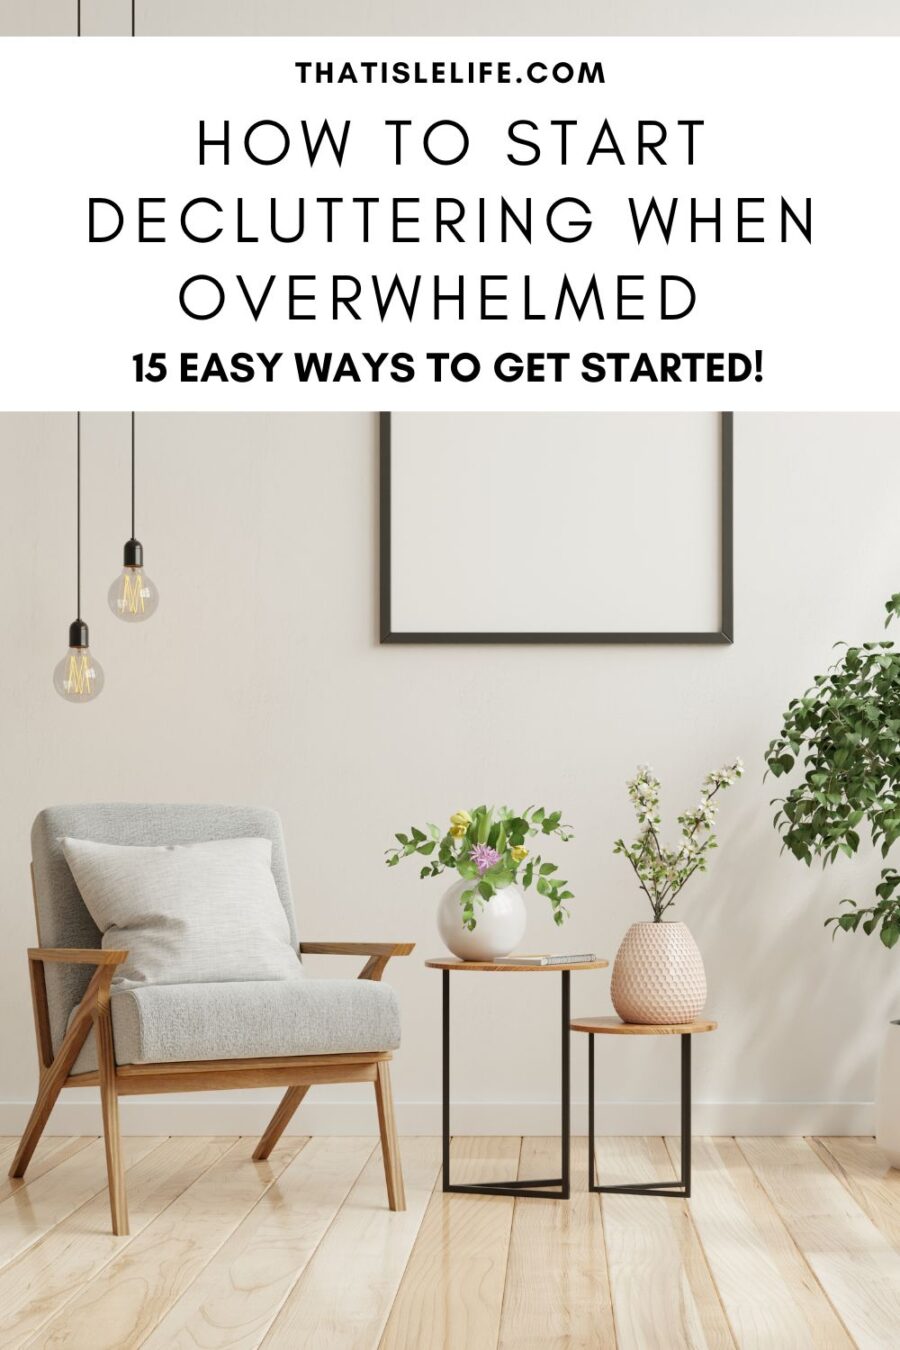 How To Start Decluttering When Overwhelmed